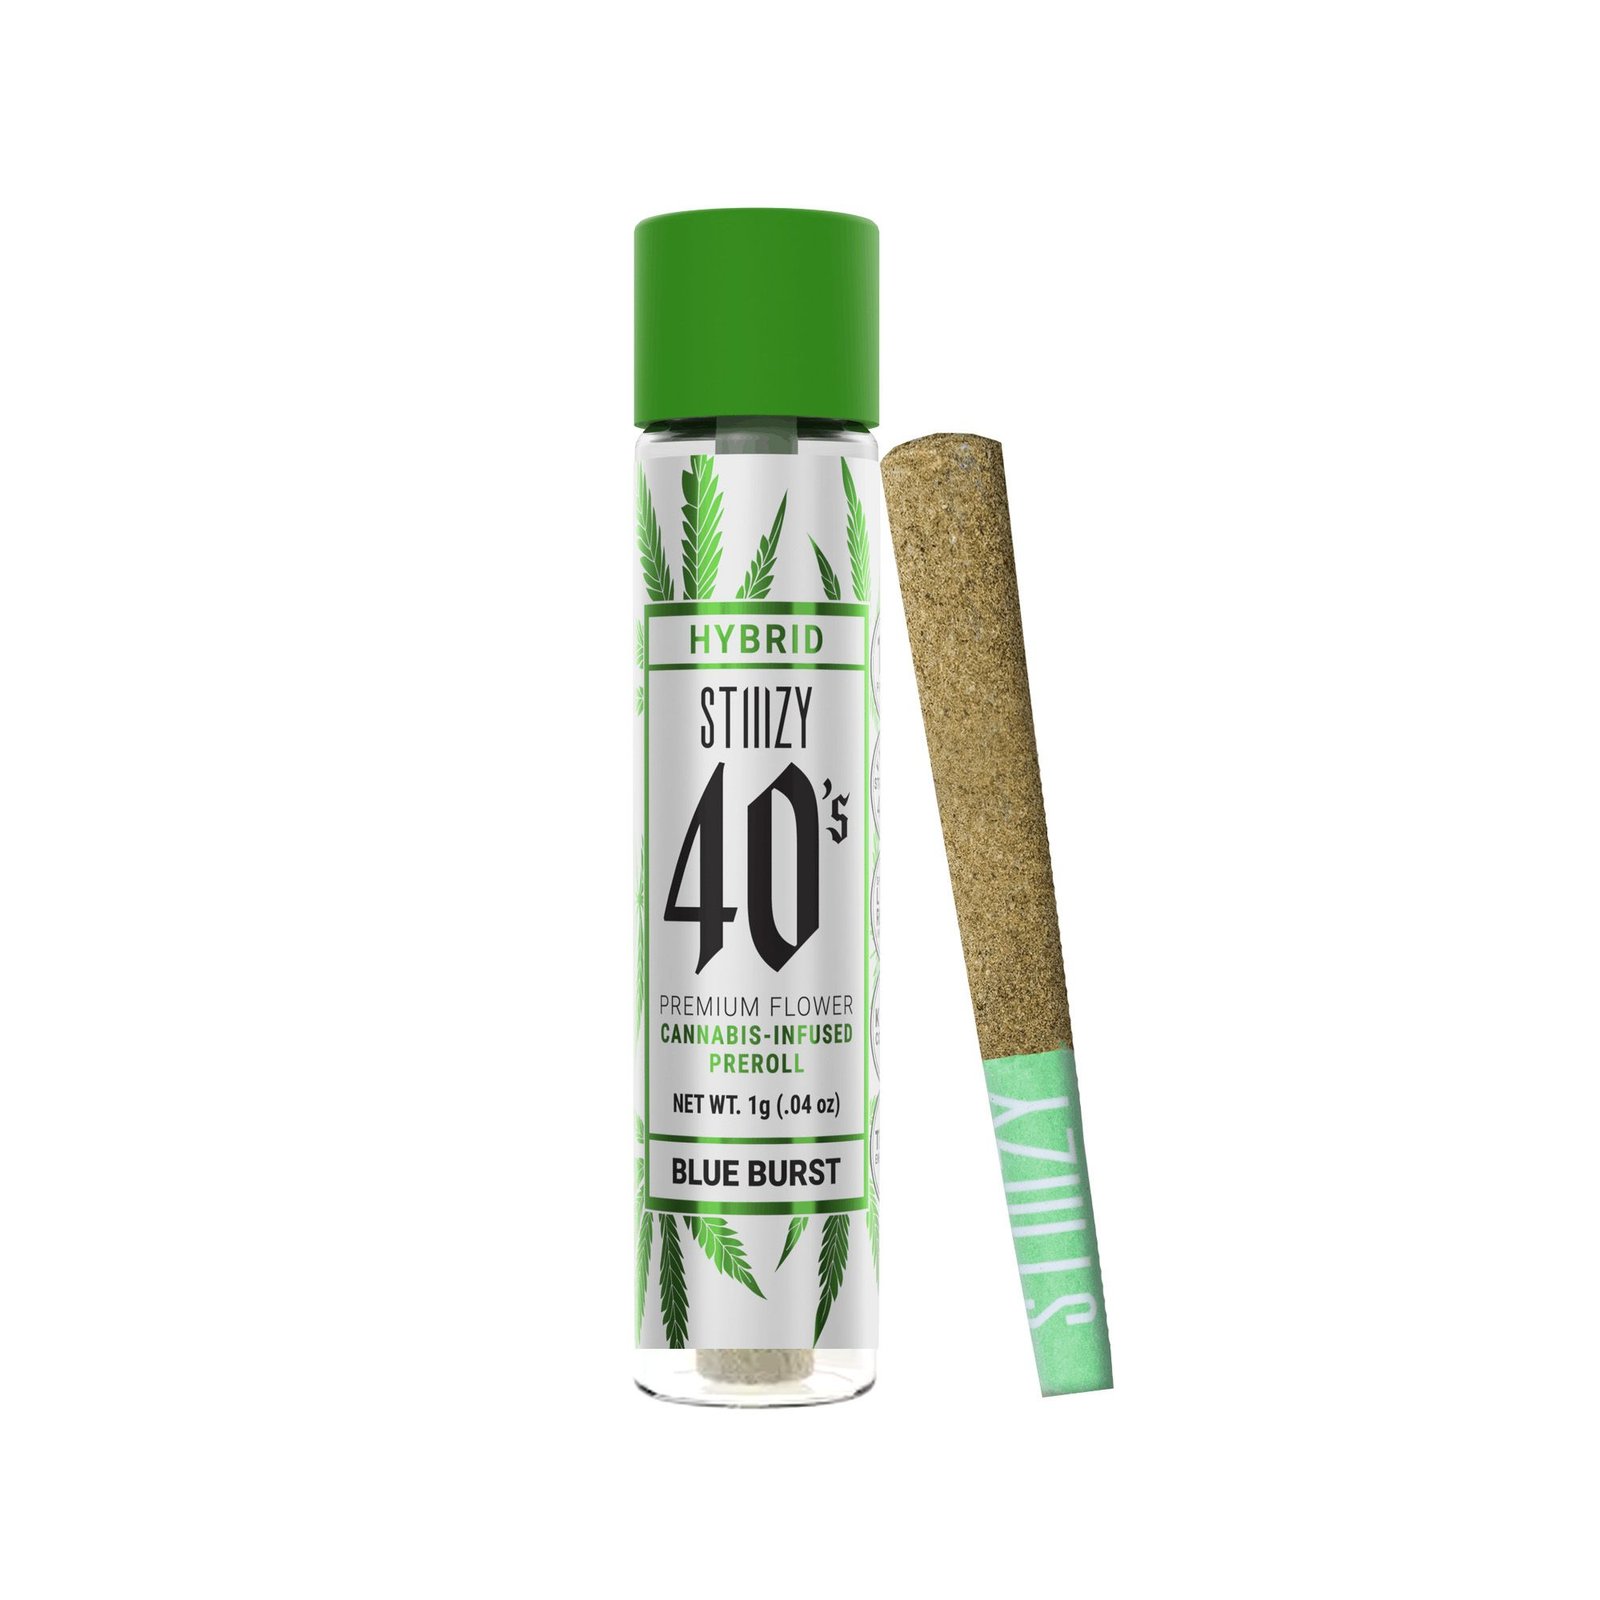 Buy Pre-rolls Online France Buy THC Joints Online France. It offers a perfect balance, delivering a harmonious high that engages both the mind and body.